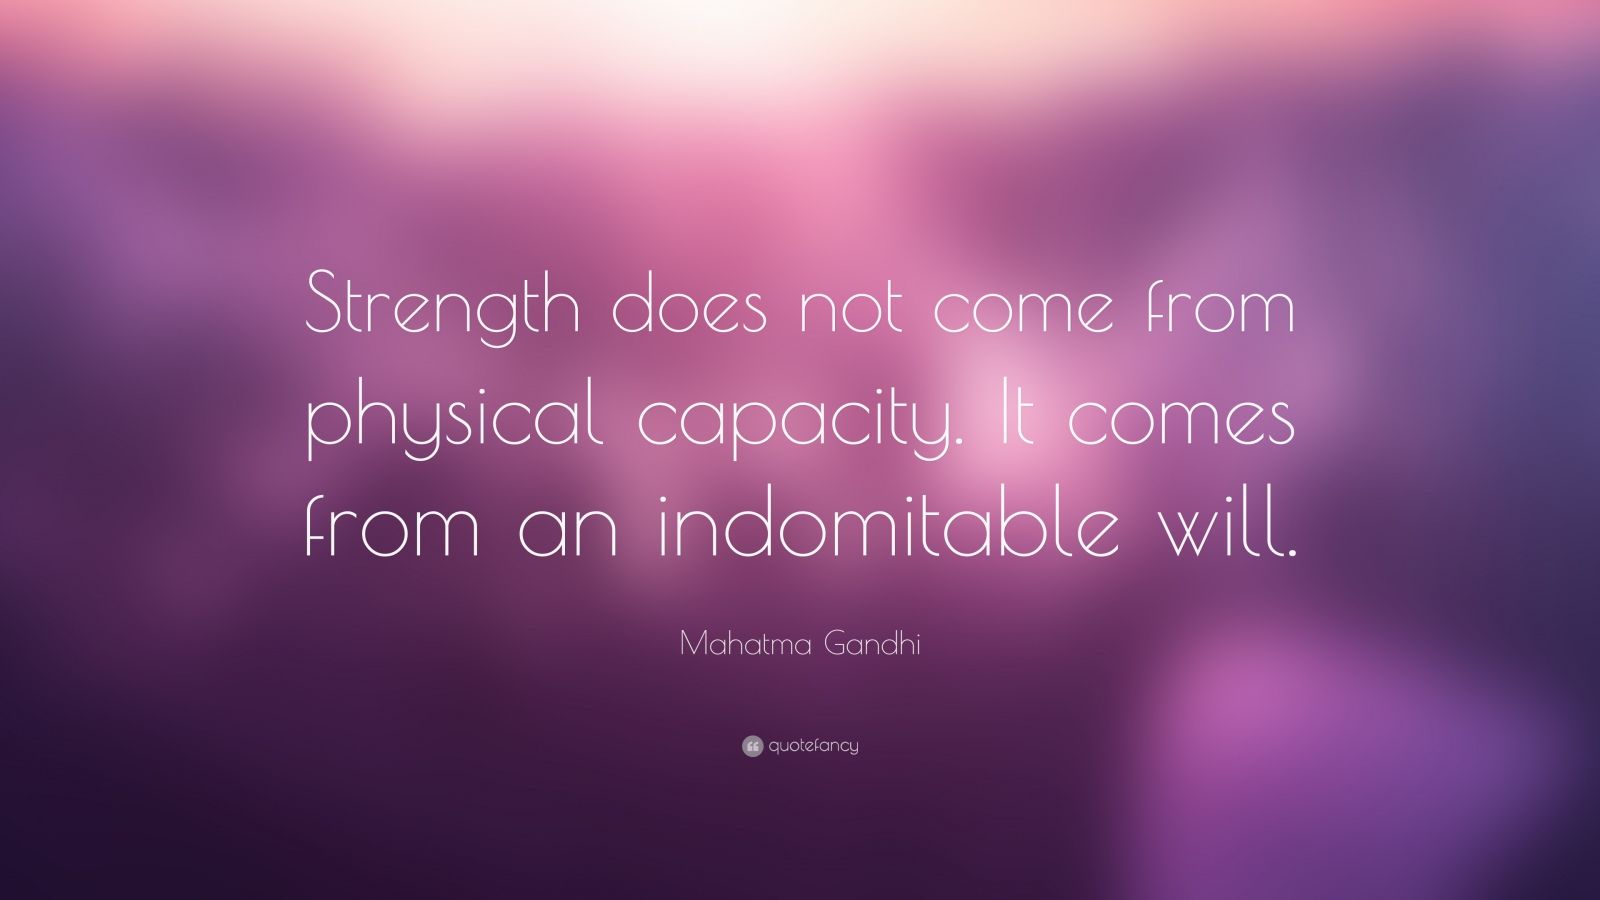 Mahatma Gandhi Quote: “Strength does not come from physical capacity ...